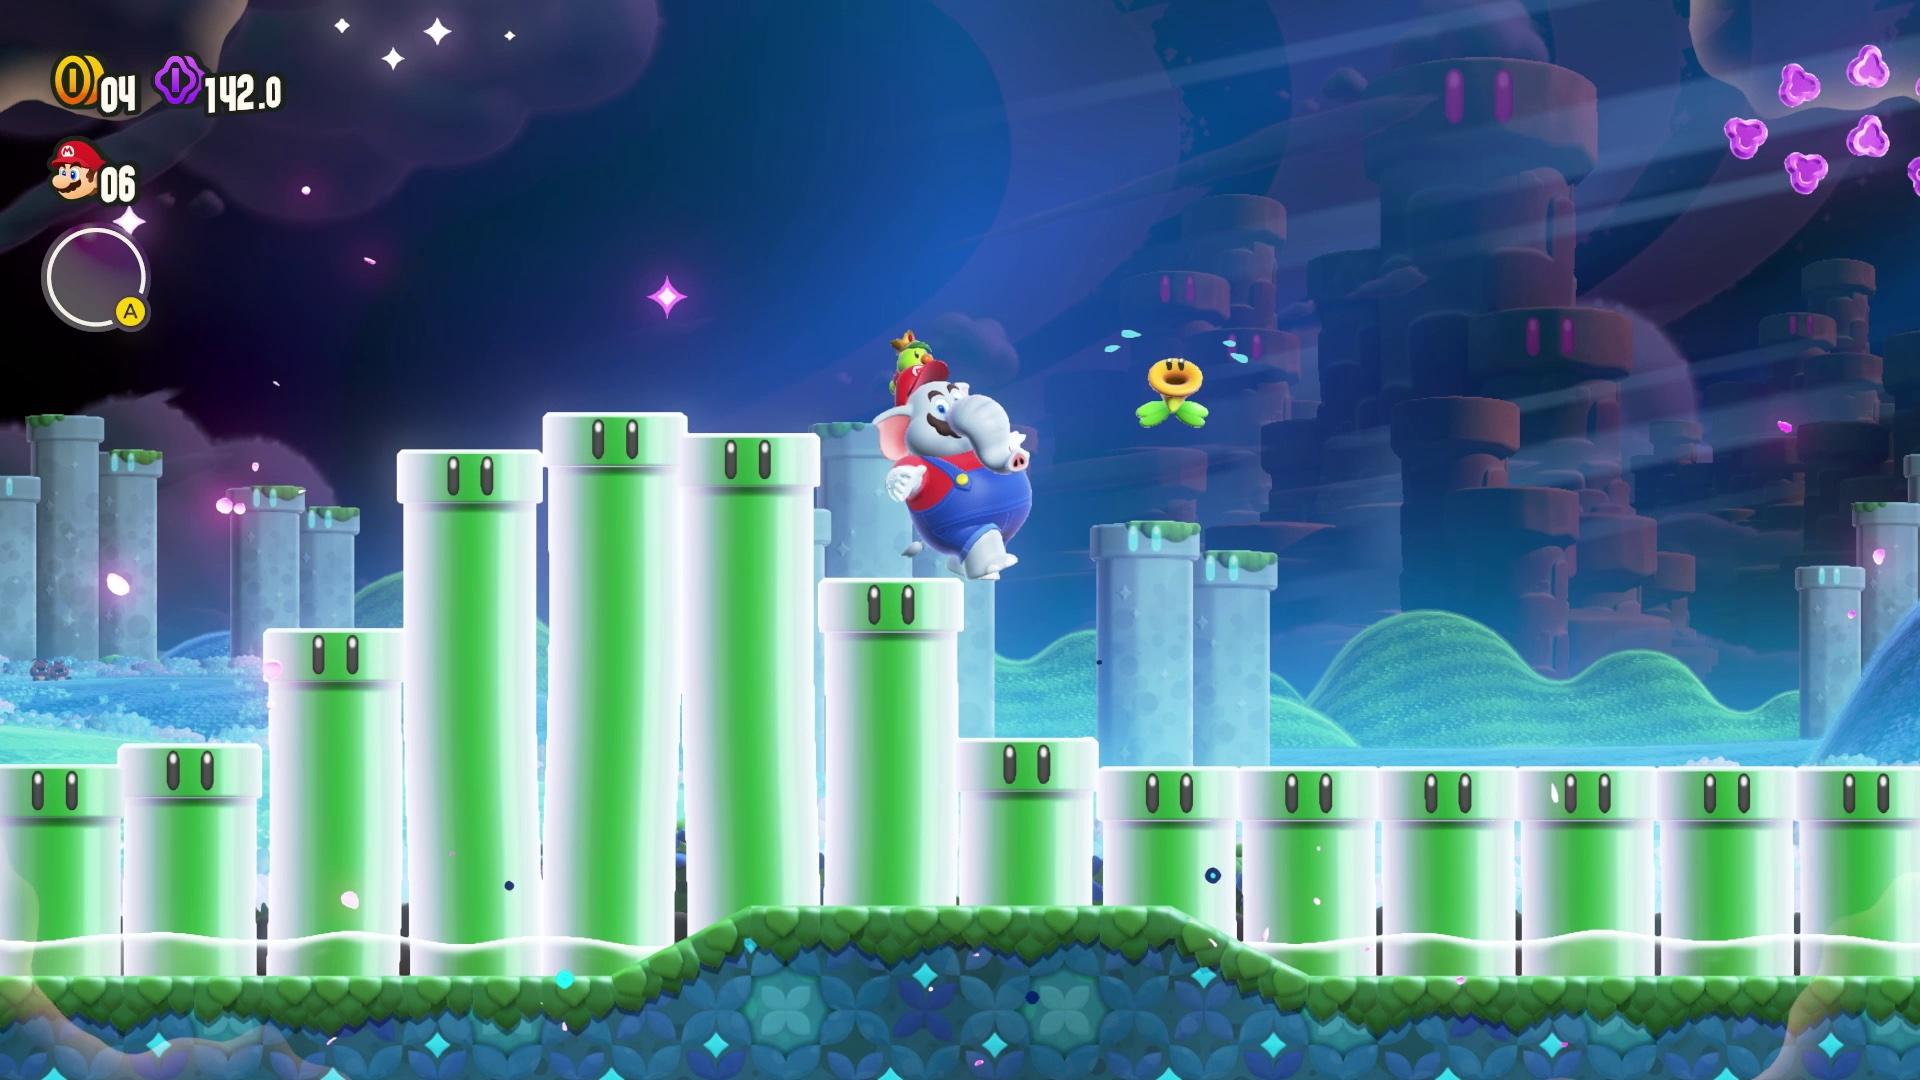 Super Mario Bros. Wonder: Know all about it - Release date